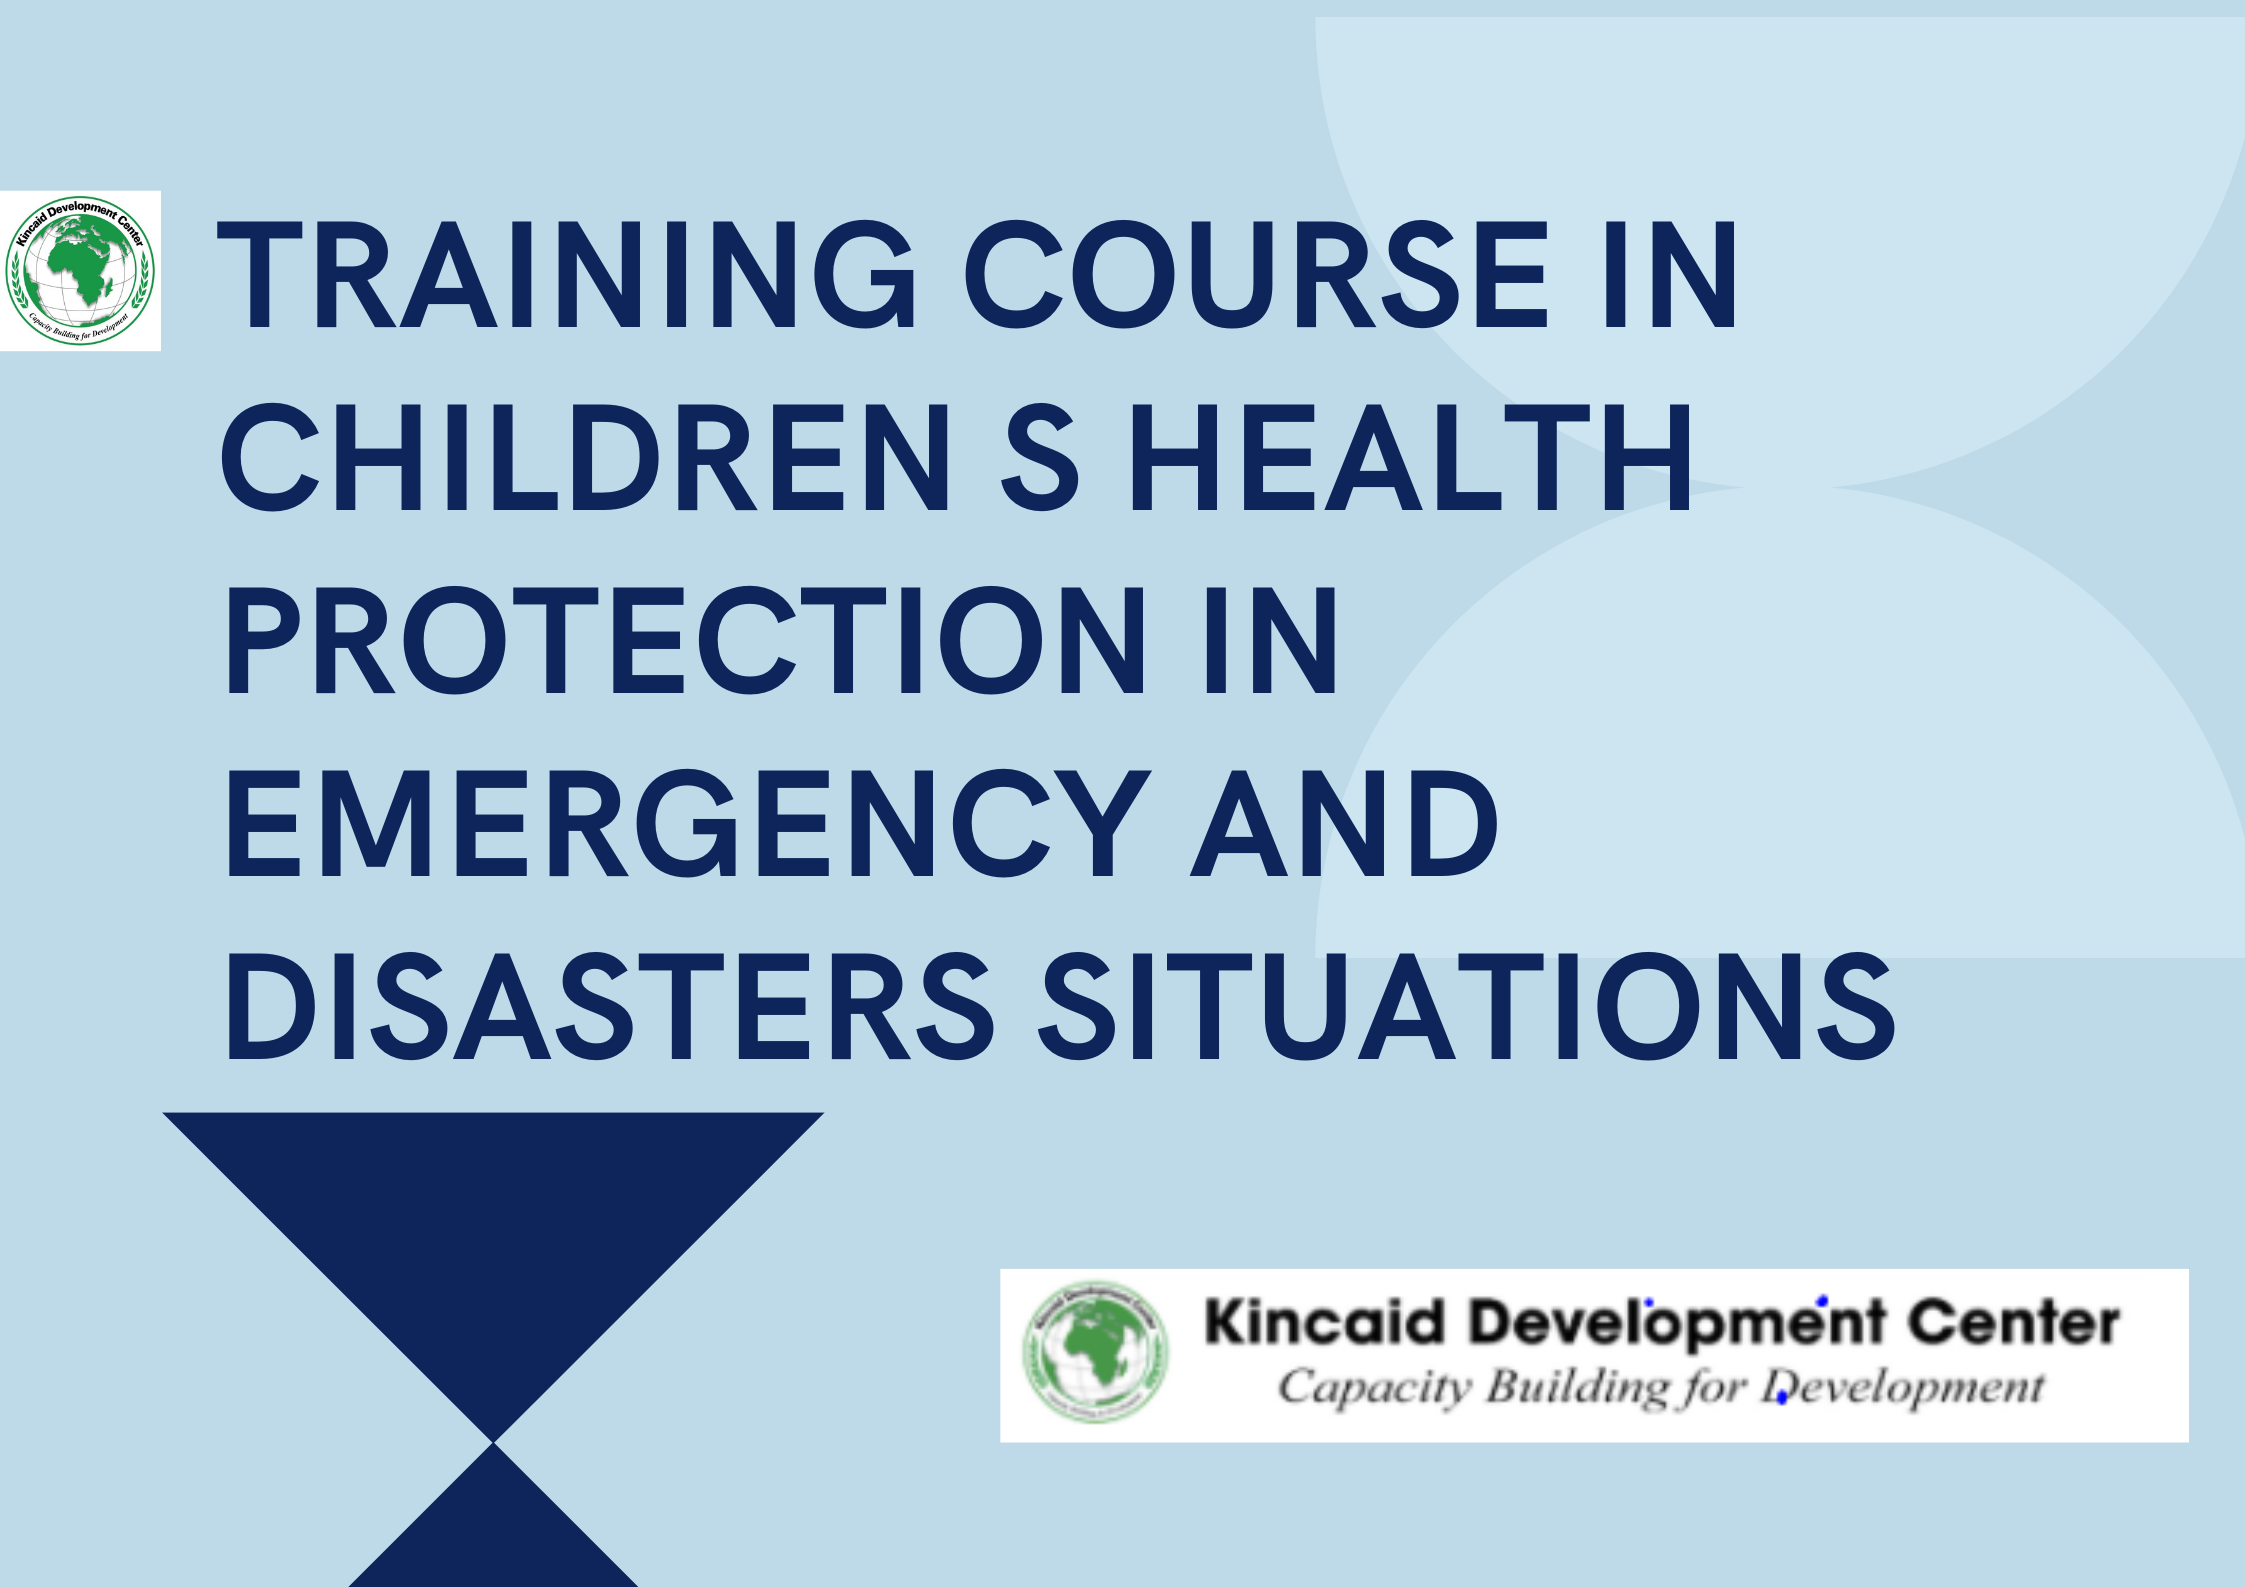 TRAINING COURSE IN CHILDREN S HEALTH PROTECTION IN EMERGENCY AND DISASTERS SITUATIONS, Nairobi, Kenya